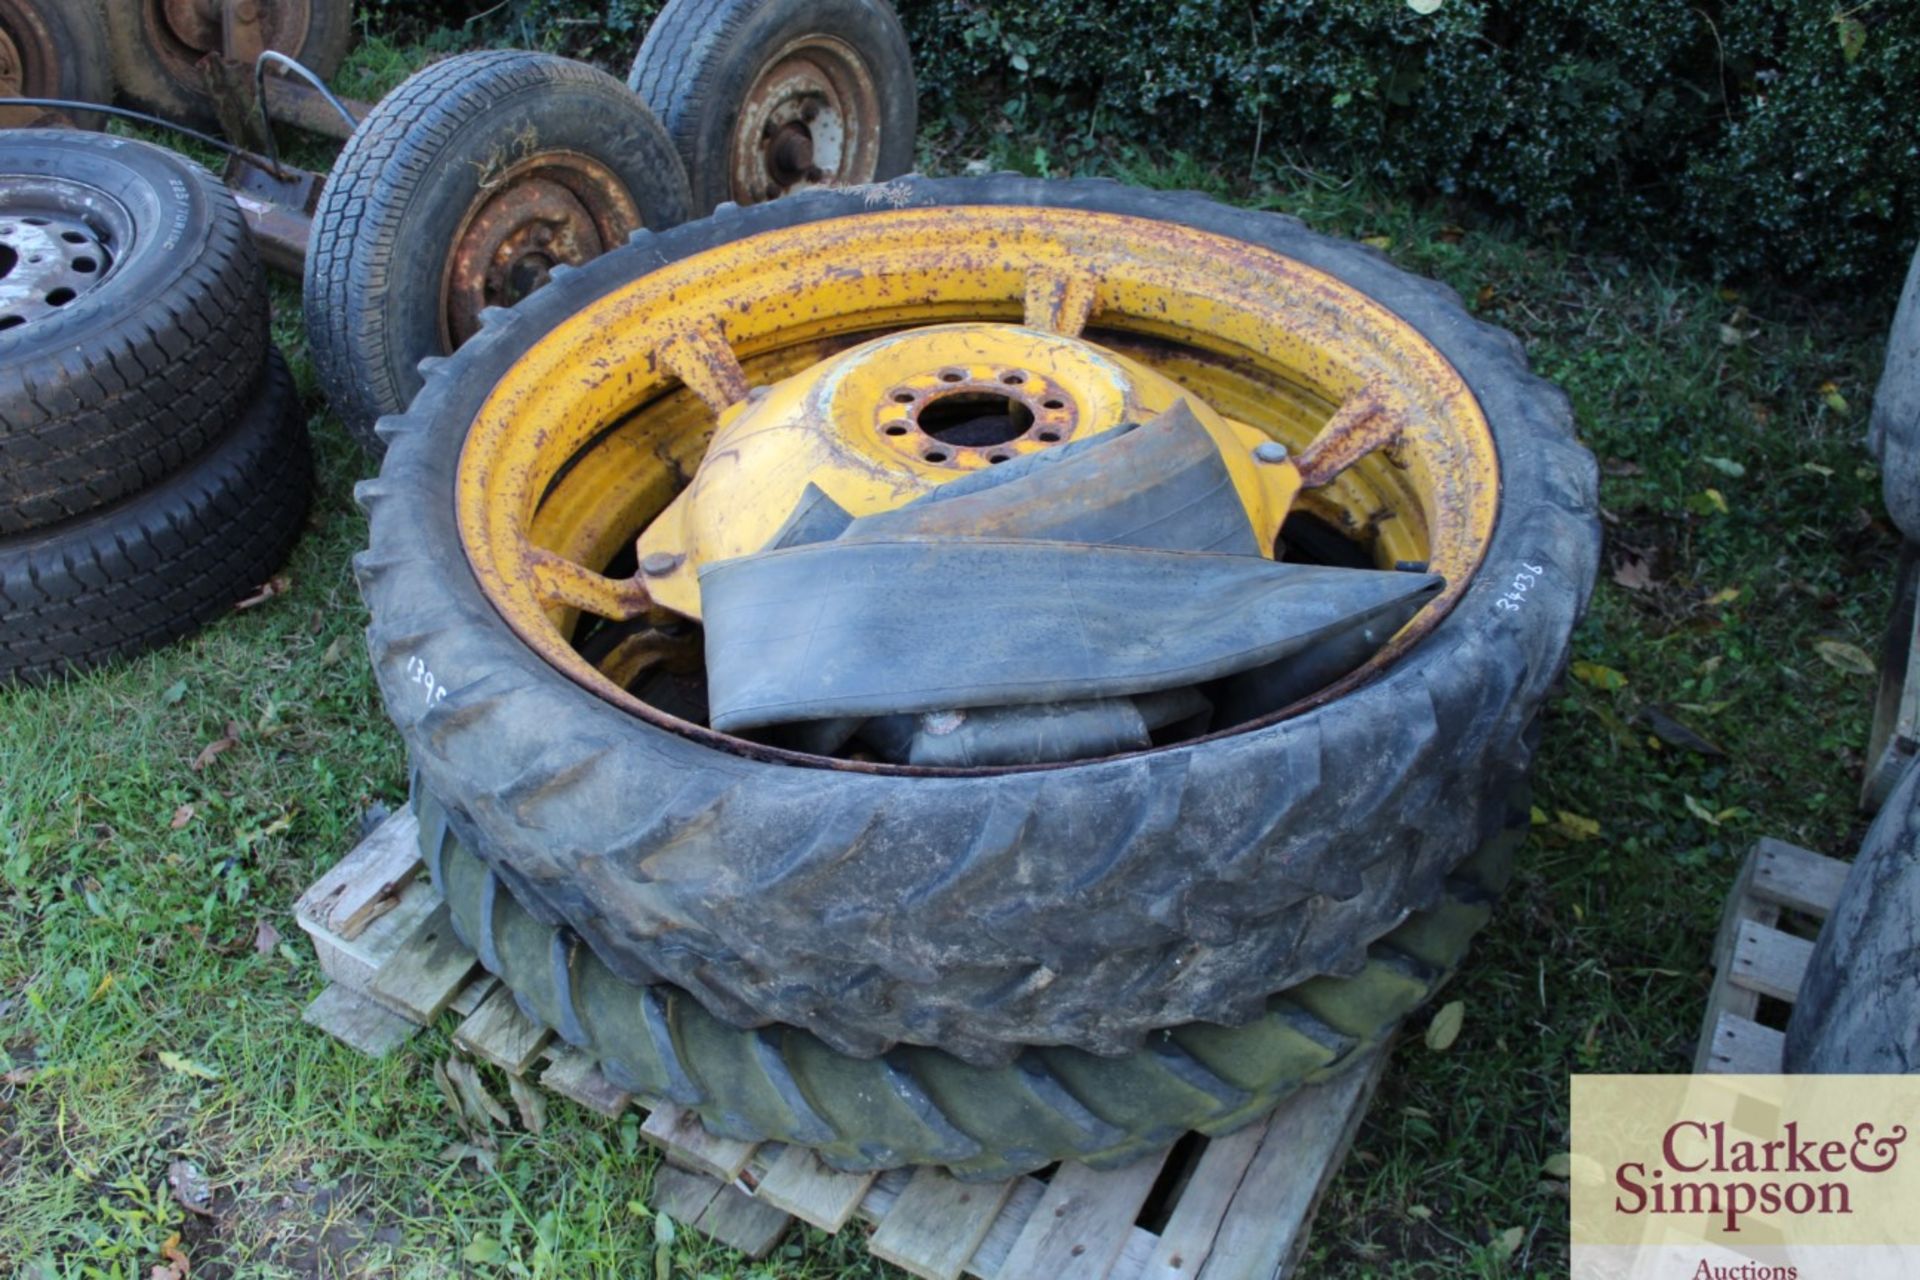 2x rowcrop wheels and tyres to fit Ferguson tractor and an additional tyre.